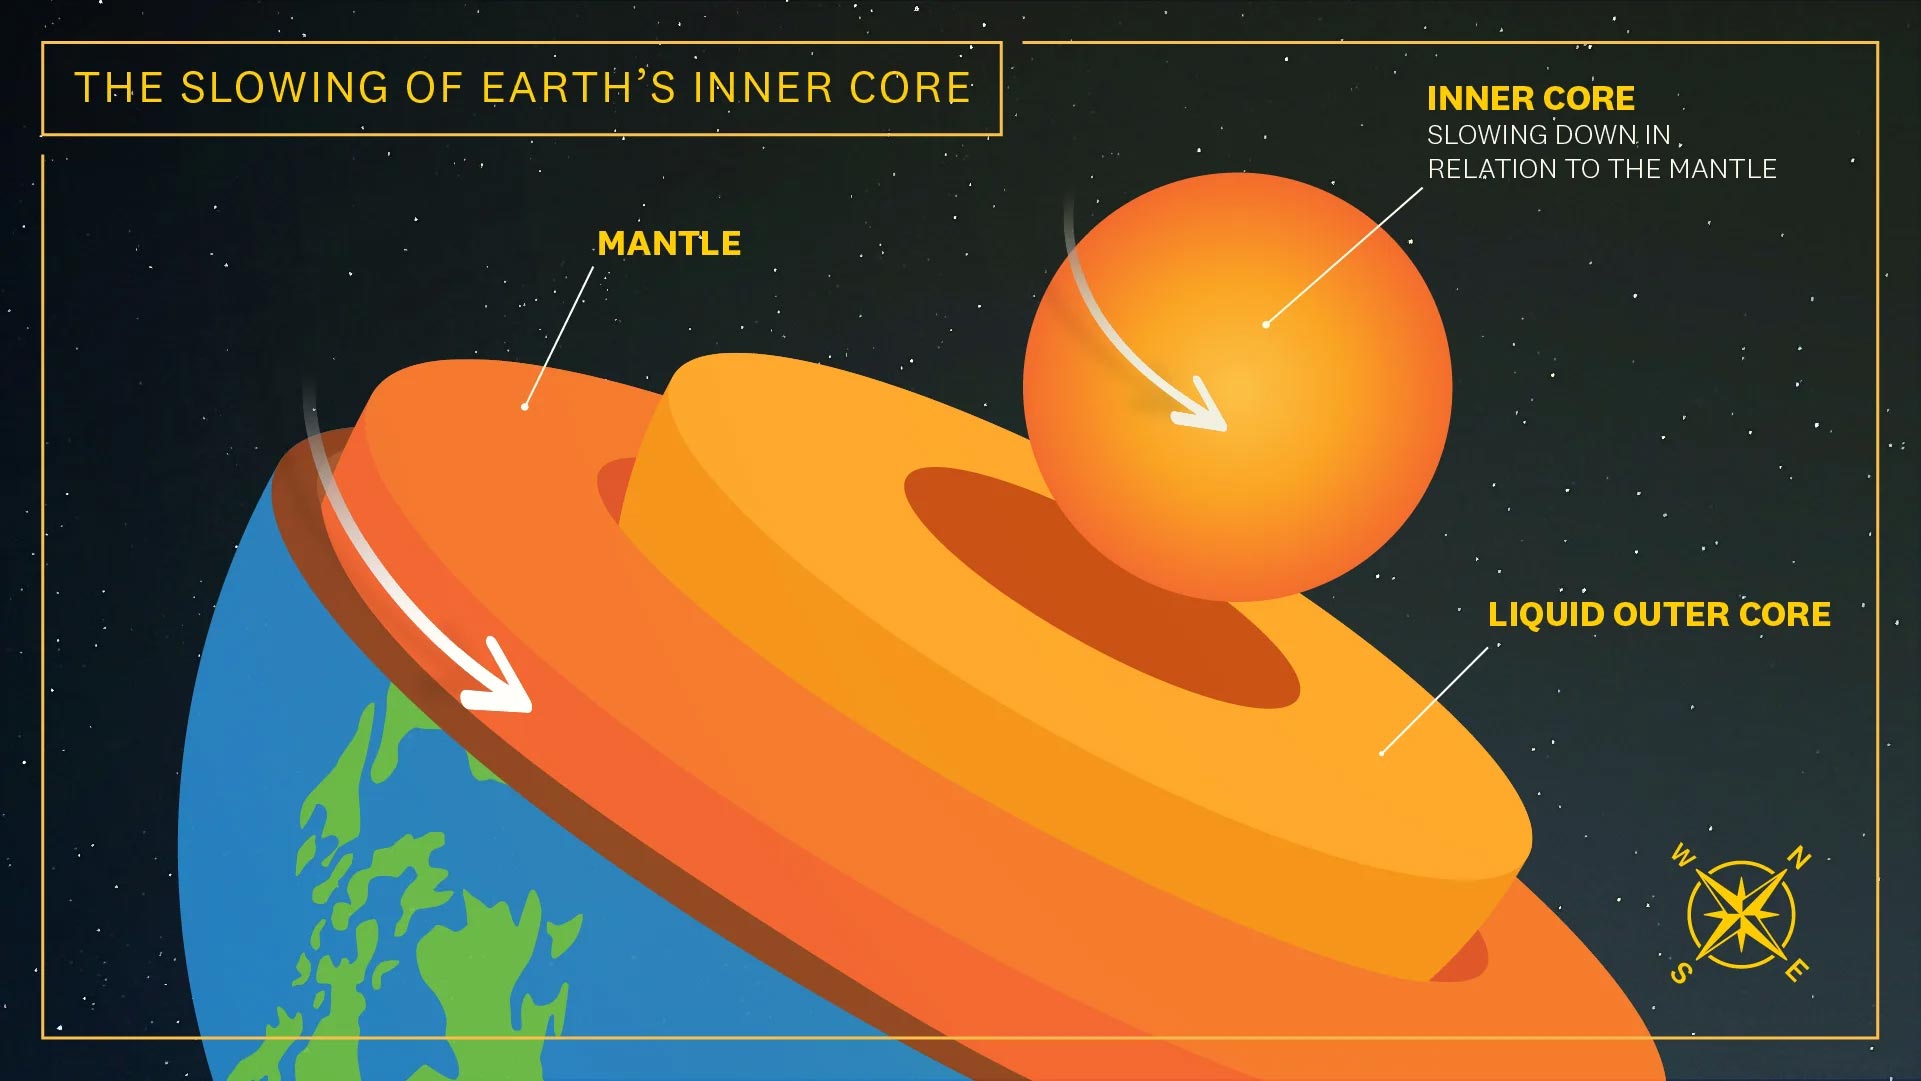 Researchers from the University of Southern California have proven that the Earth’s core is losing speed